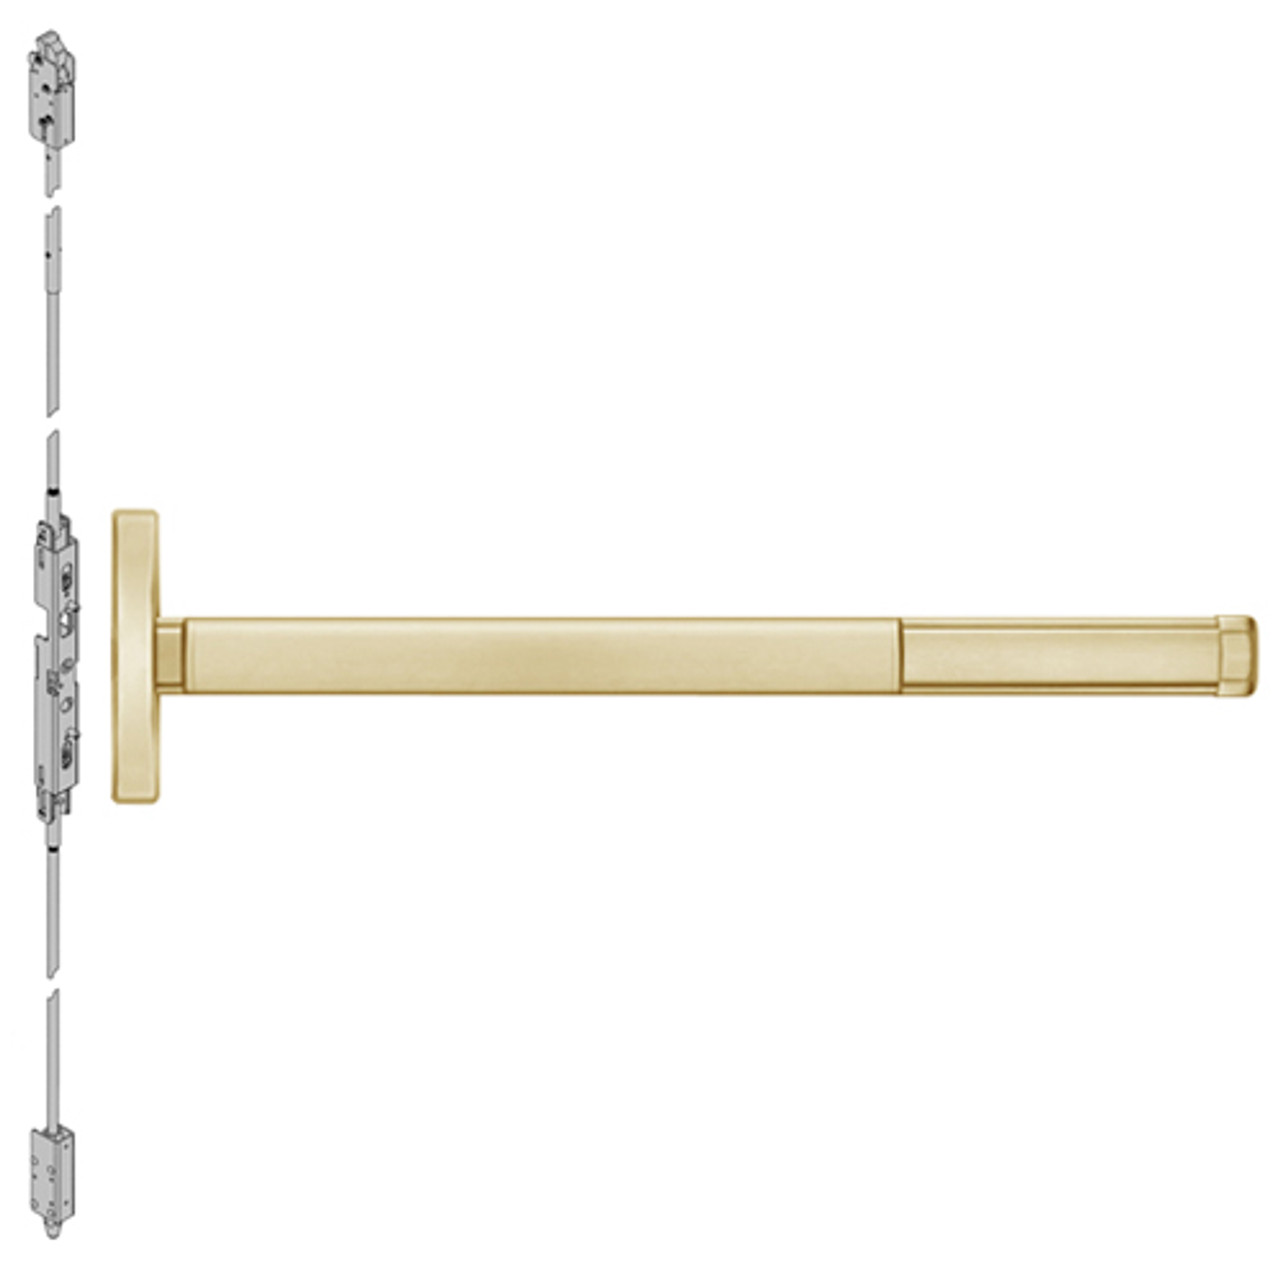 2603CD-606-36 PHI 2600 Series Non Fire Rated Concealed Vertical Rod Exit Device Prepped for Key Retracts Latchbolt with Cylinder Dogging in Satin Brass Finish